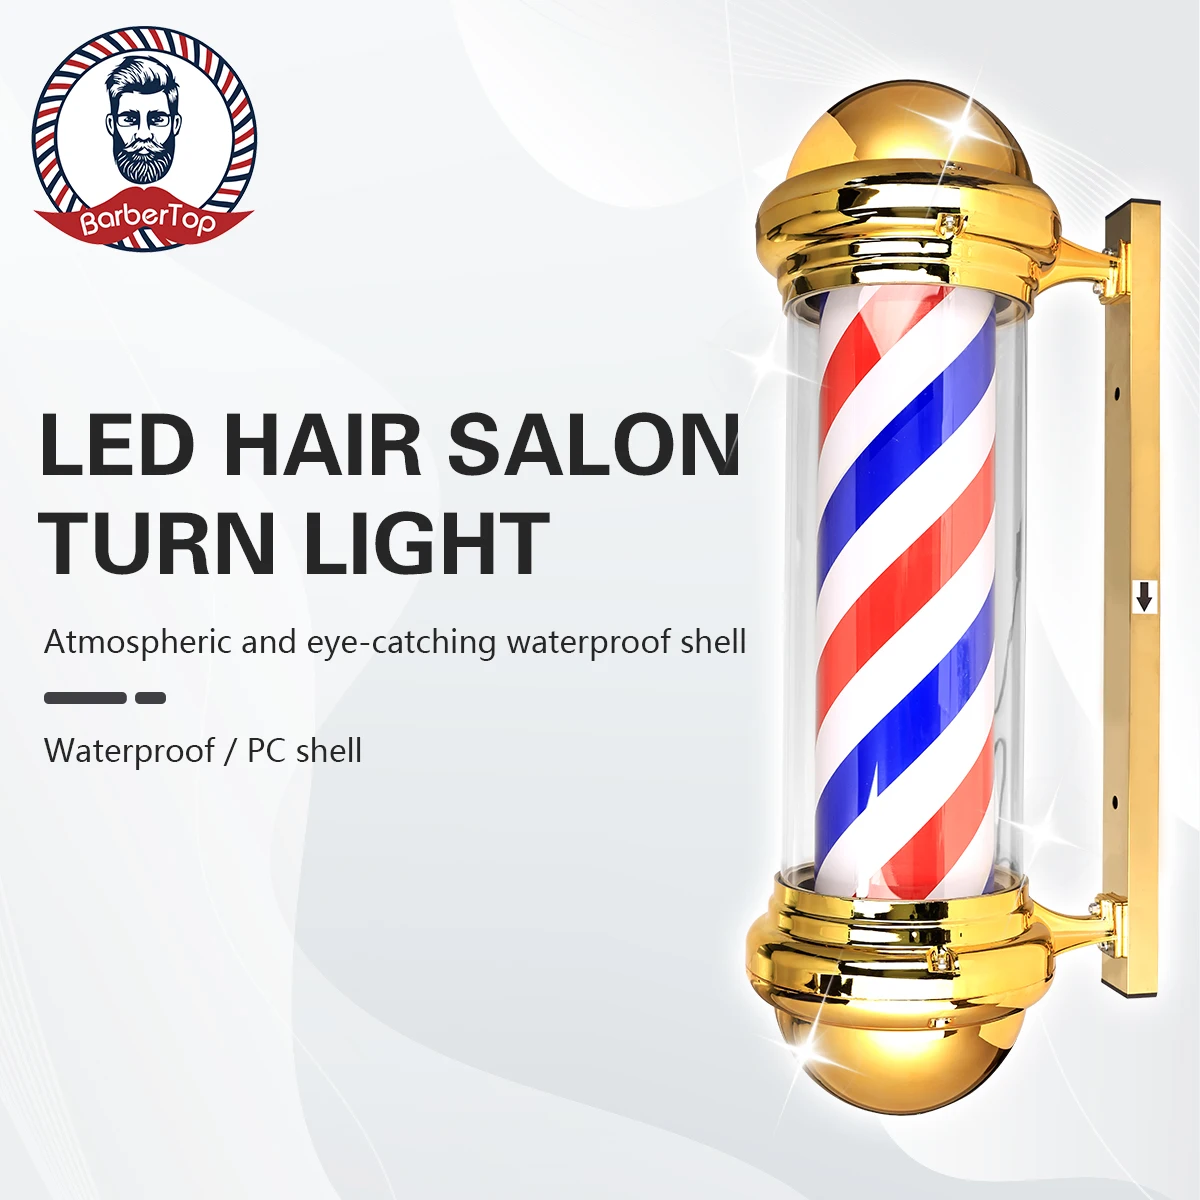 29'' Barber Pole Light Hair Salon Open Sign Rotating LED Strips Barbershop Waterproof Save Energy Wall Mount Light 2023 custom dropshipping products 2023 minimum order quantity 1 supports customization neon sign custom logo